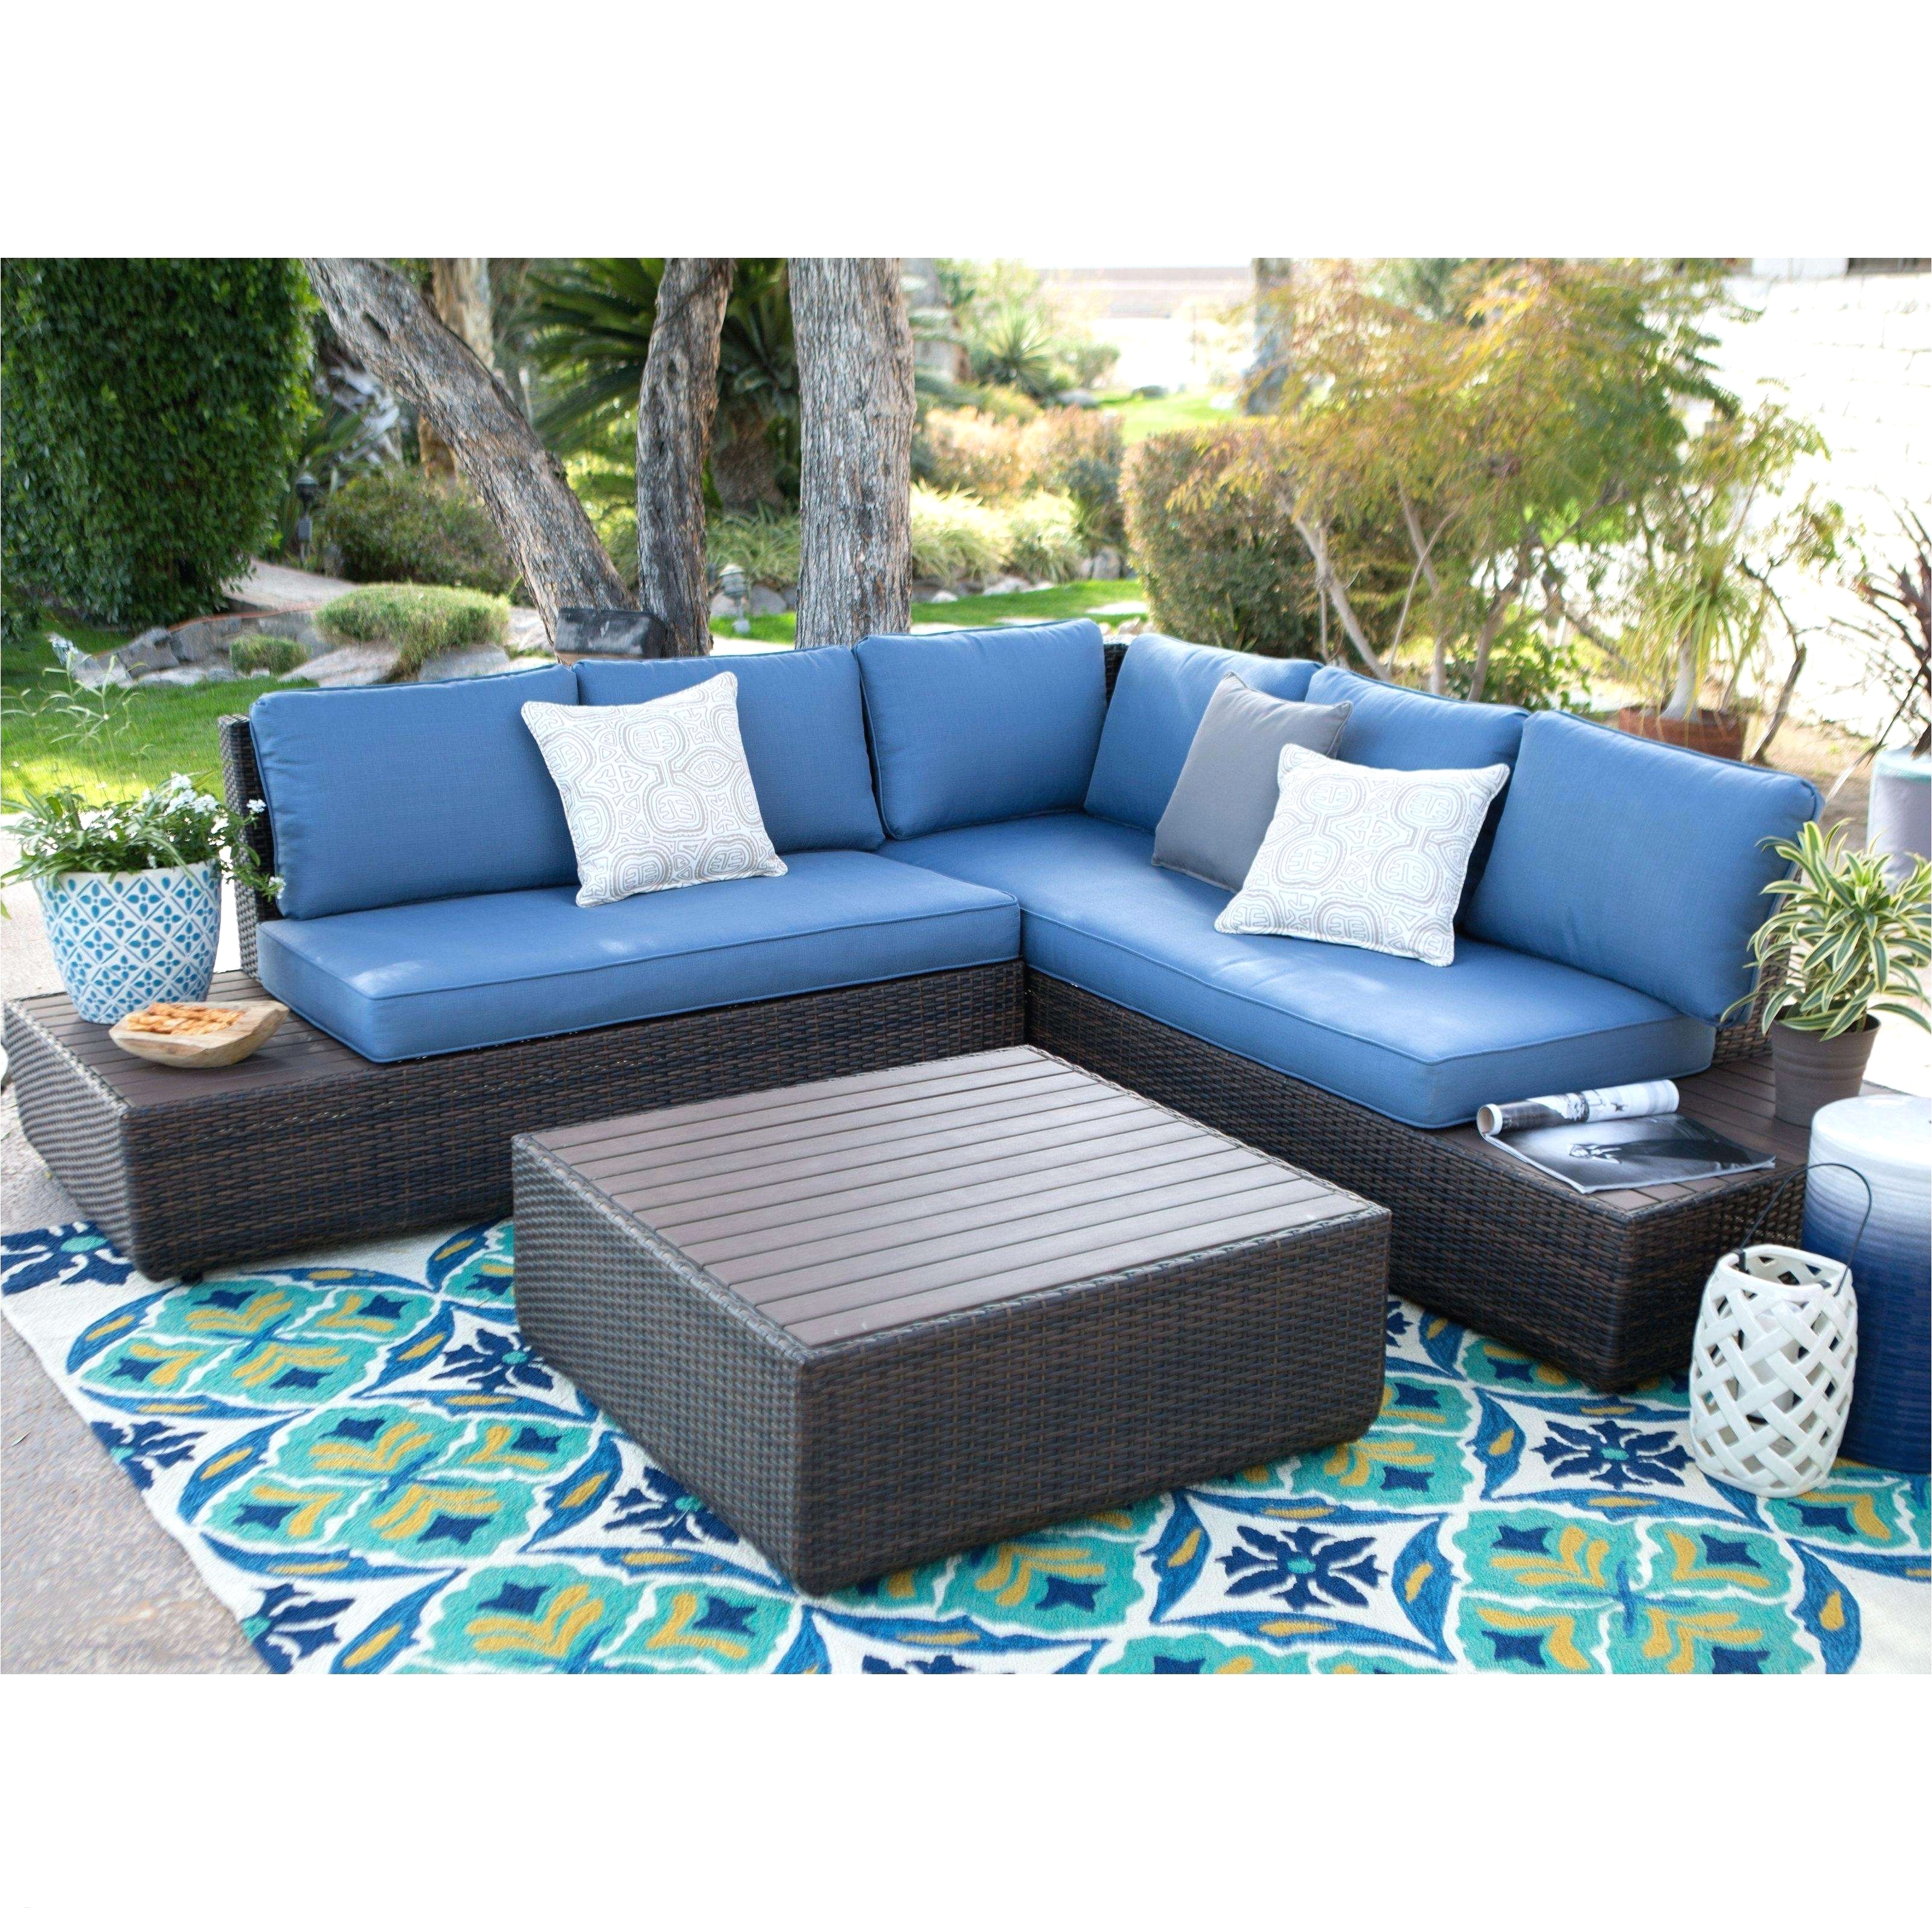 bjs sofa set costco outdoor patio furniture awesome patio bench cushions unique